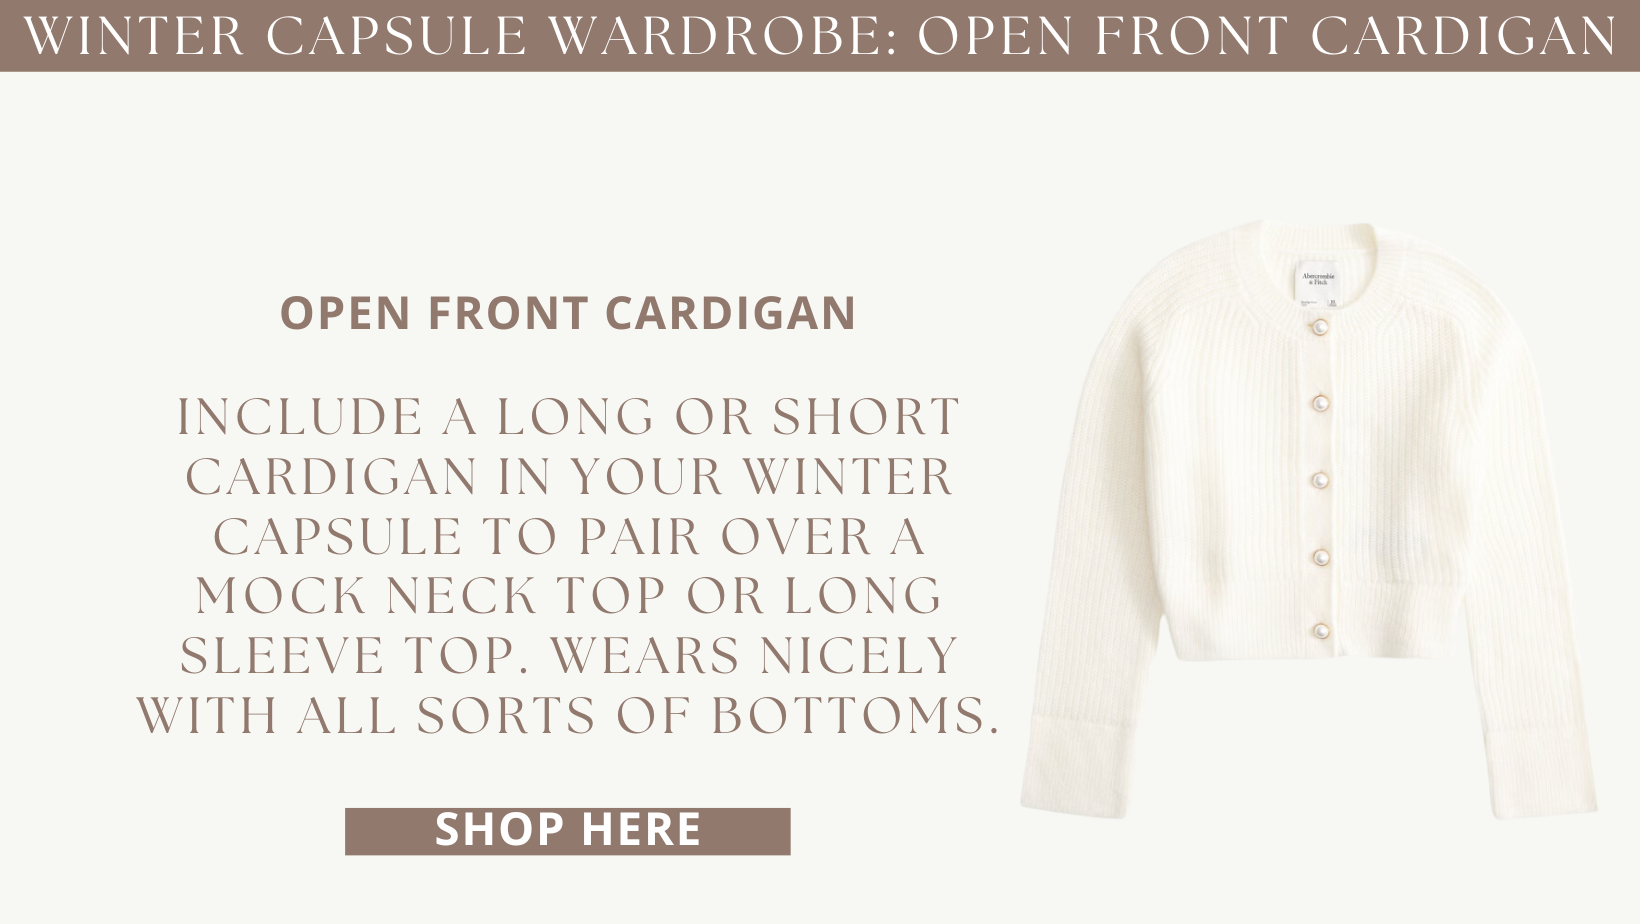 Open front cardigan outfit ideas